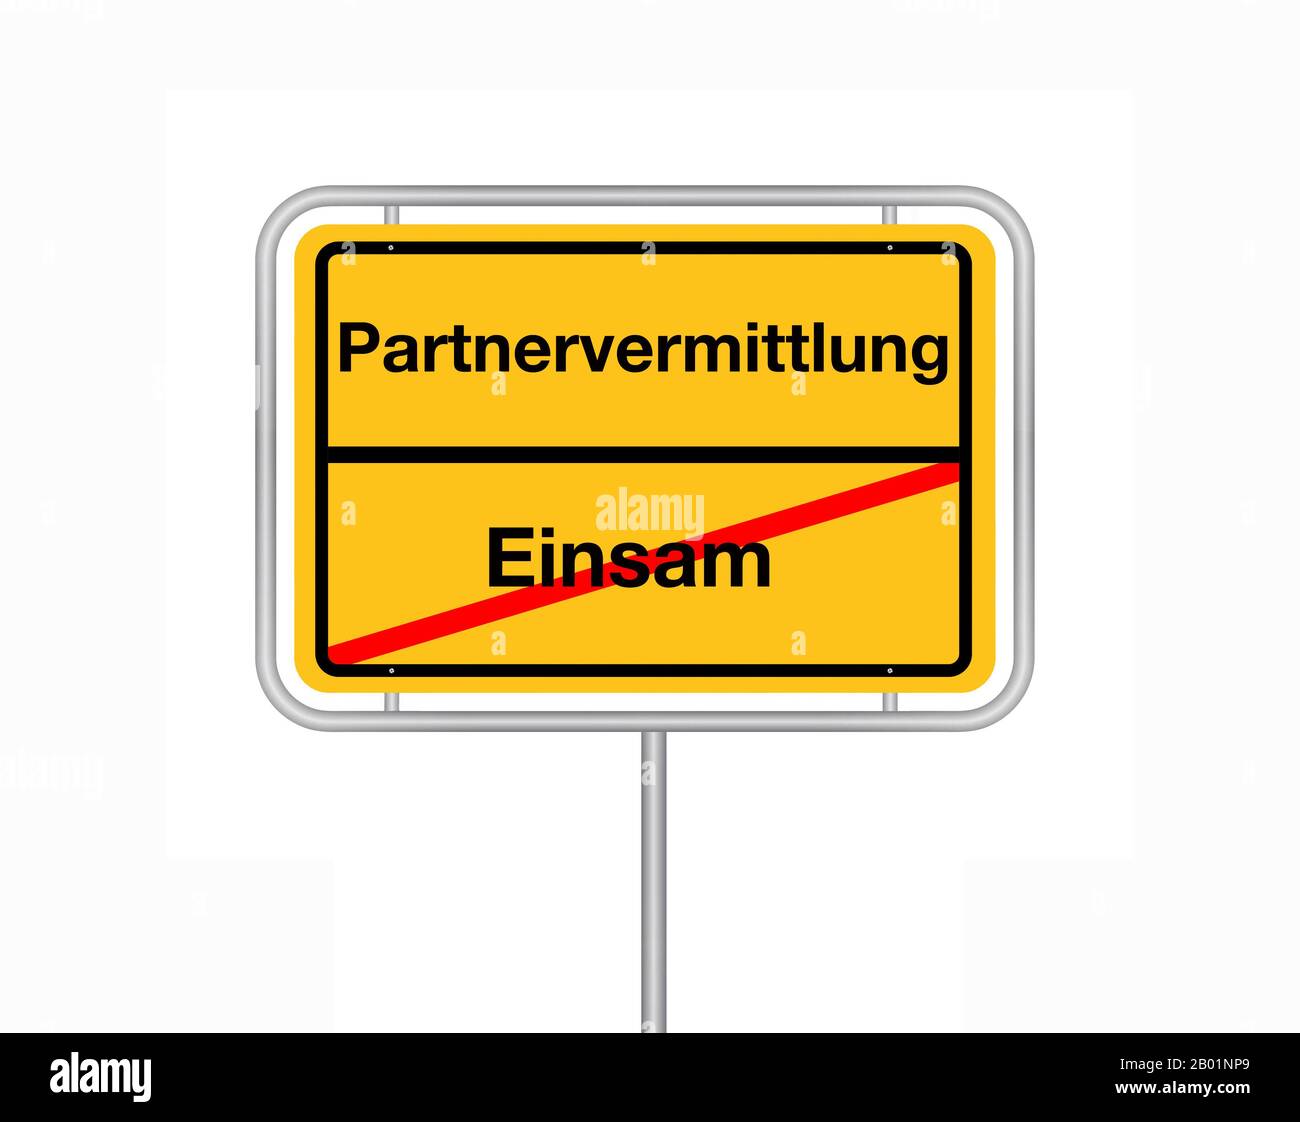 city limit sign lettering einsam - Partnervermittlung, lonesome - dating agency, Germany Stock Photo